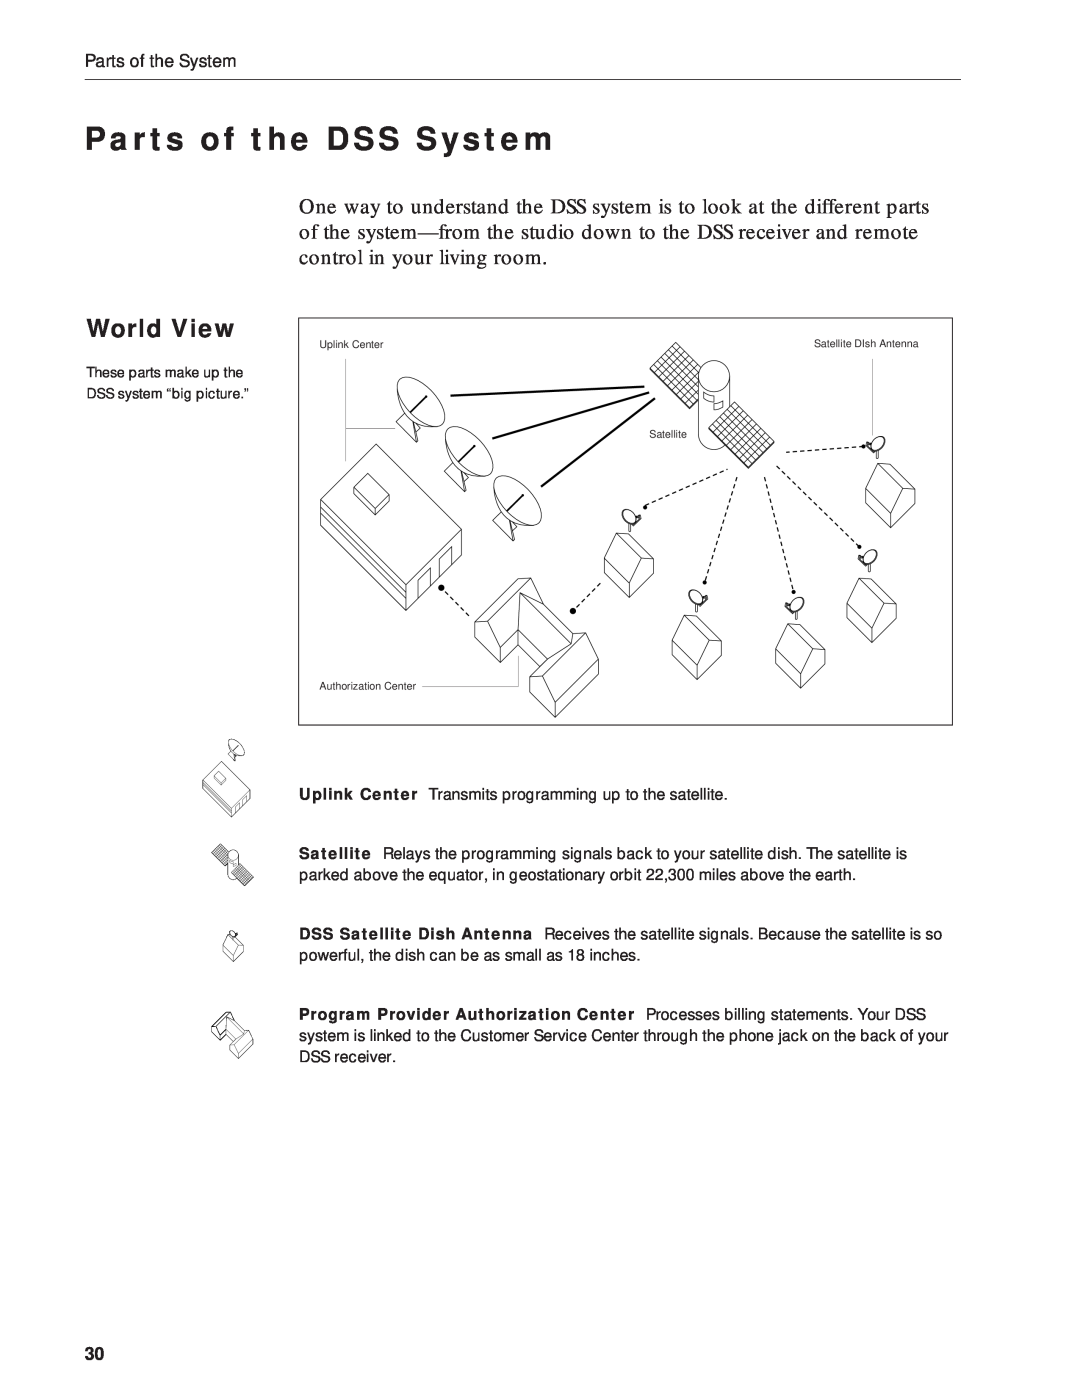 RCA DRD212NW user manual Parts of the DSS System, World View, Parts of the System 